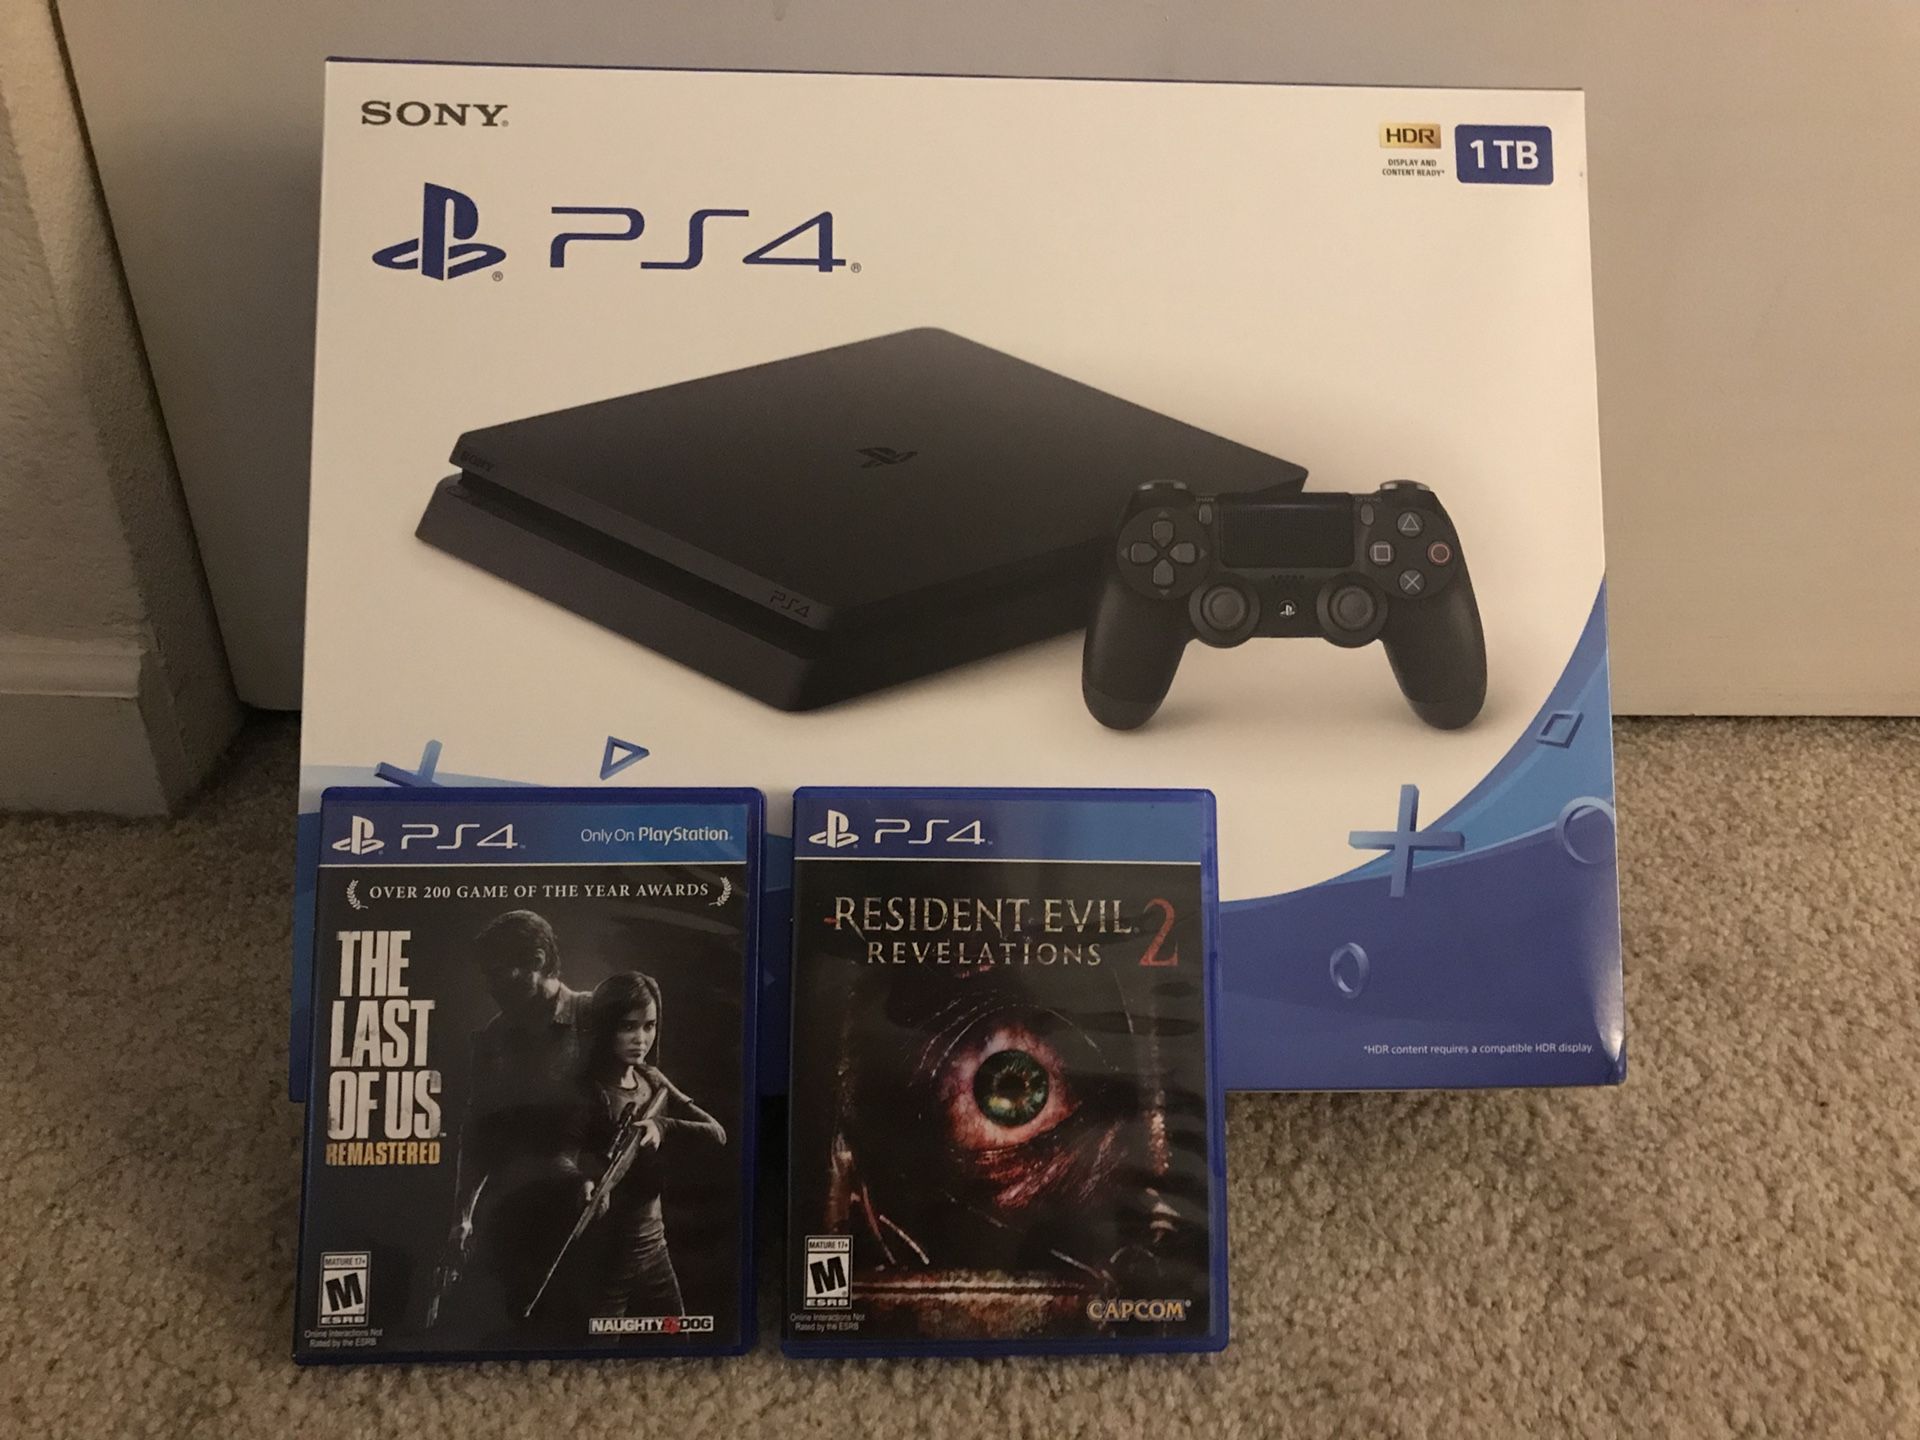 Brand new unopened PS4 1Tb + 2 games